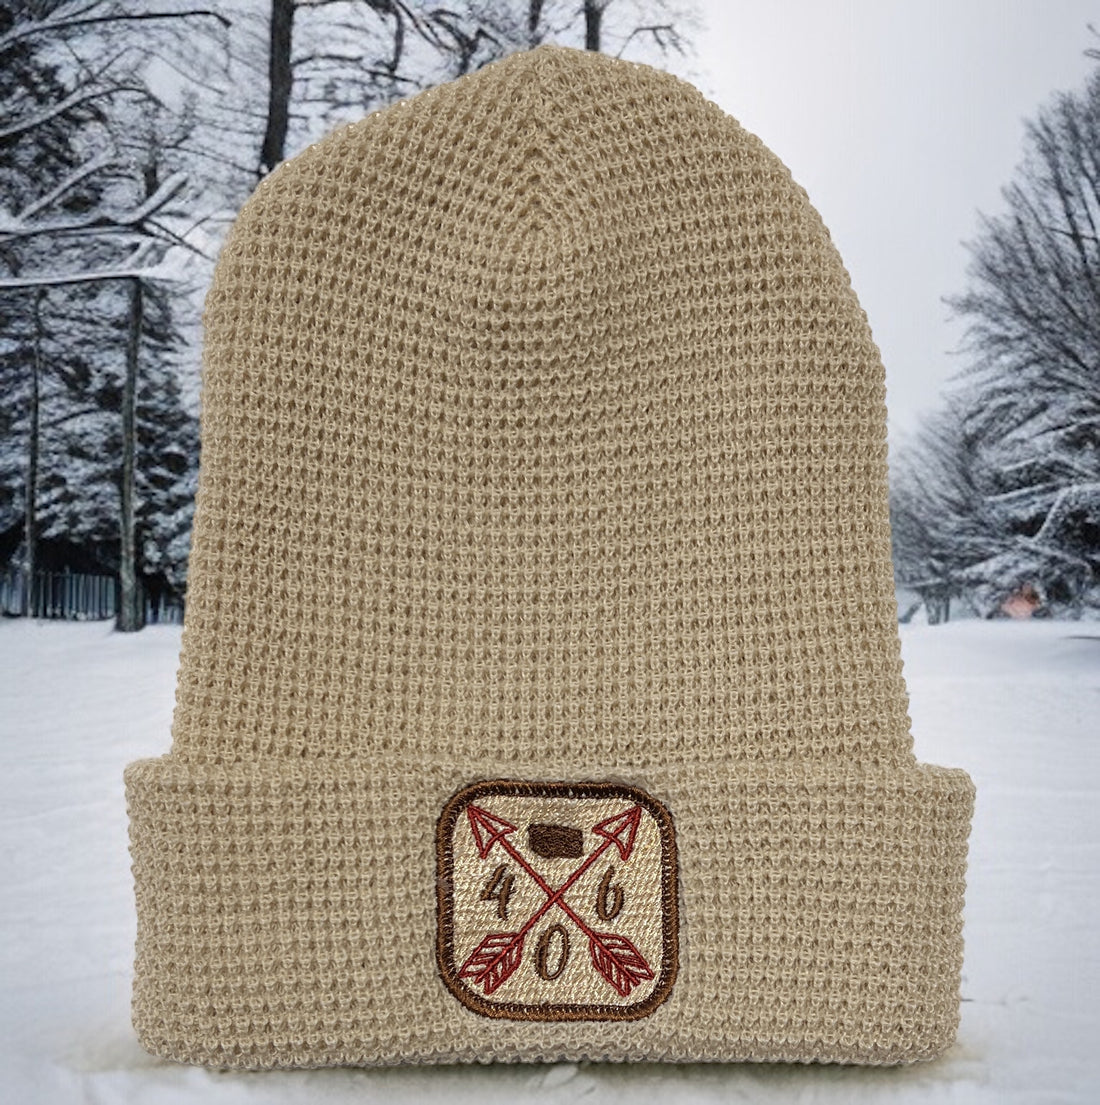 A waffle-knit beanie with "Montana Pride" embroidery, ideal for staying warm in style while showing love for the Treasure State.